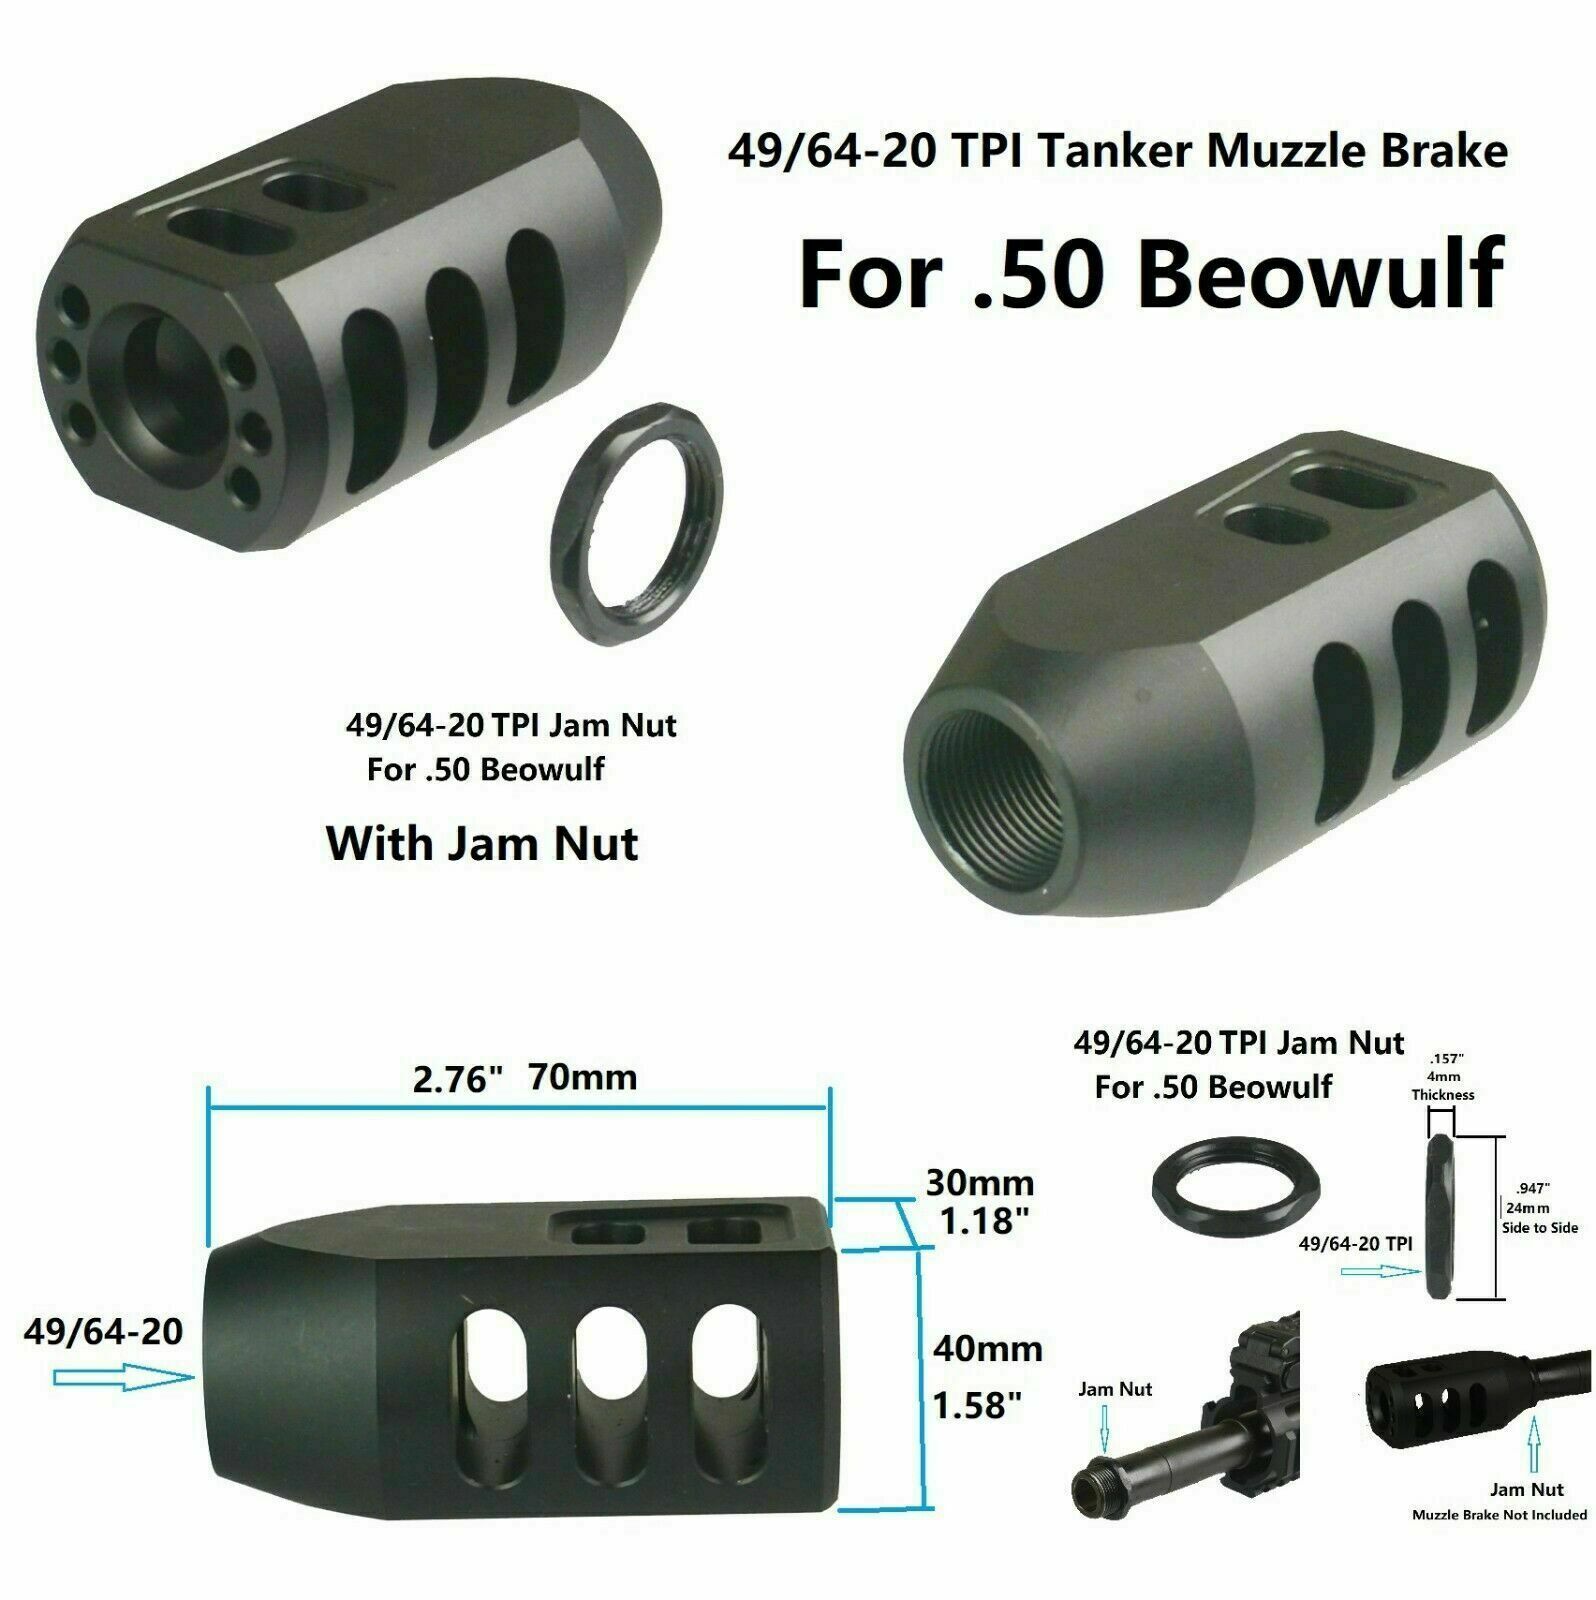 .45 Short Compact Mini Tanker Style Muzzle Brake 37/64x28 Thread With Jam Nut 